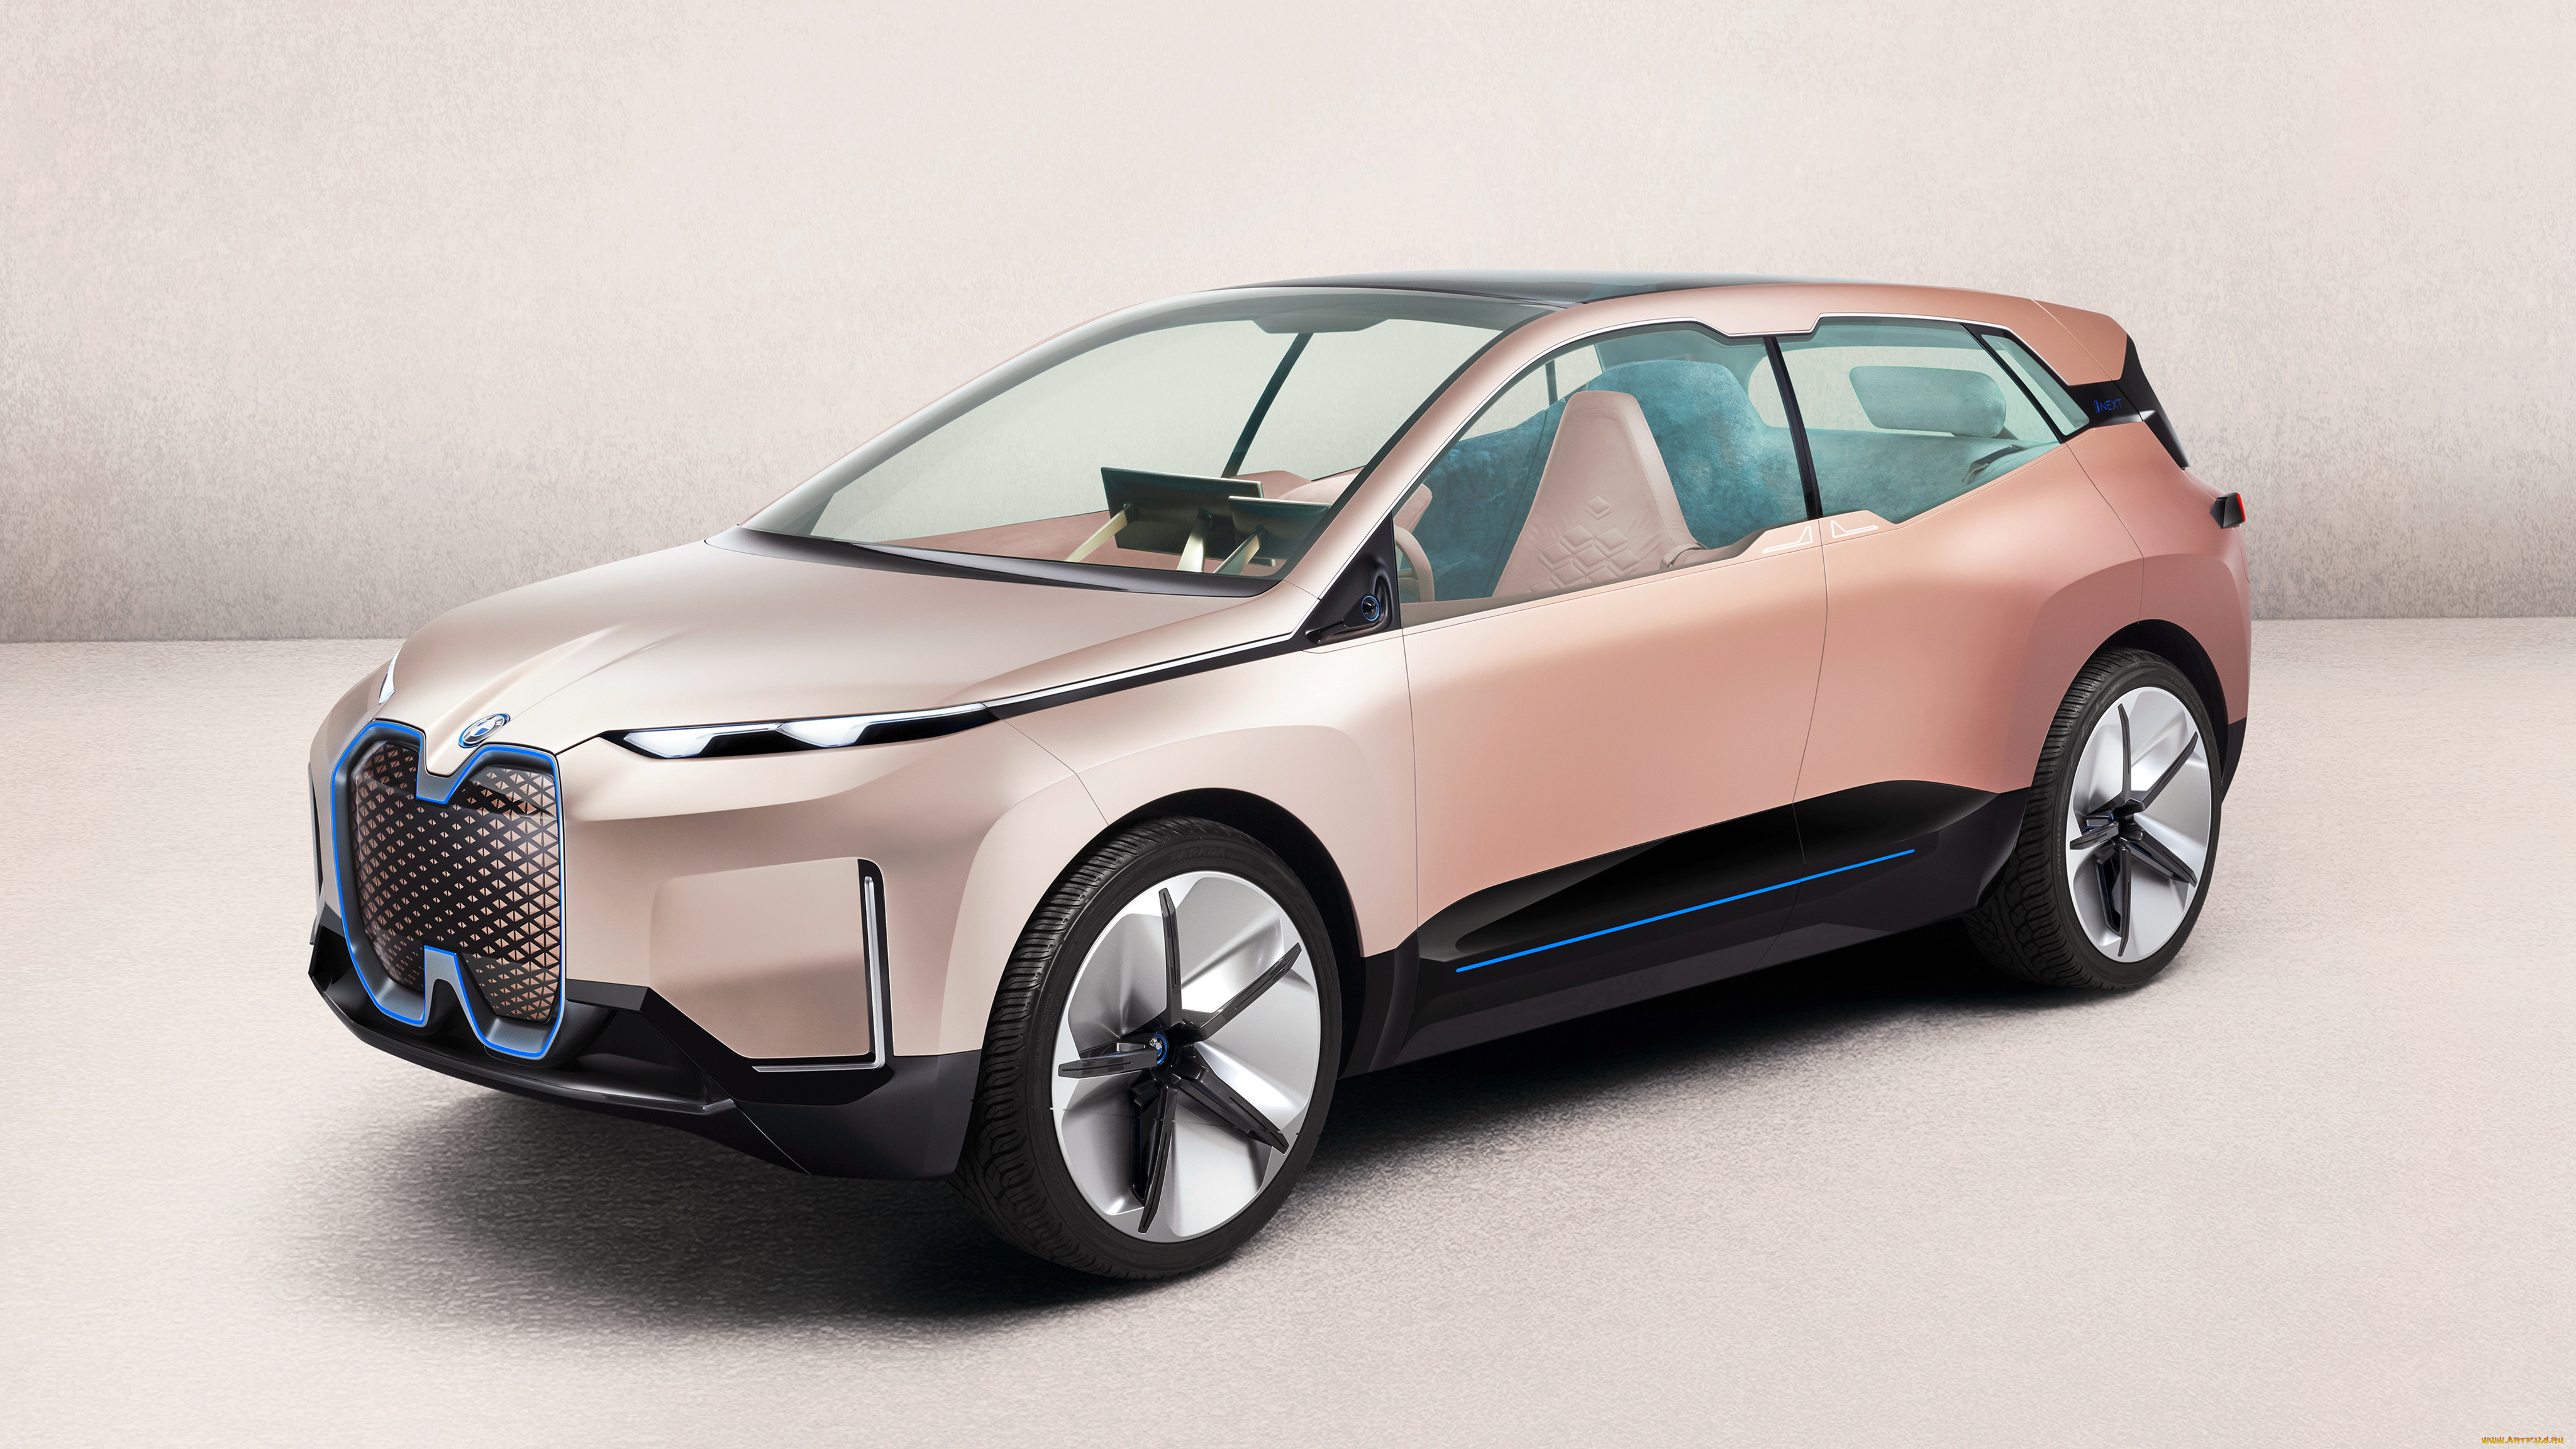 2019 bmw vision inext, , bmw, vision, , inext, 2019, 